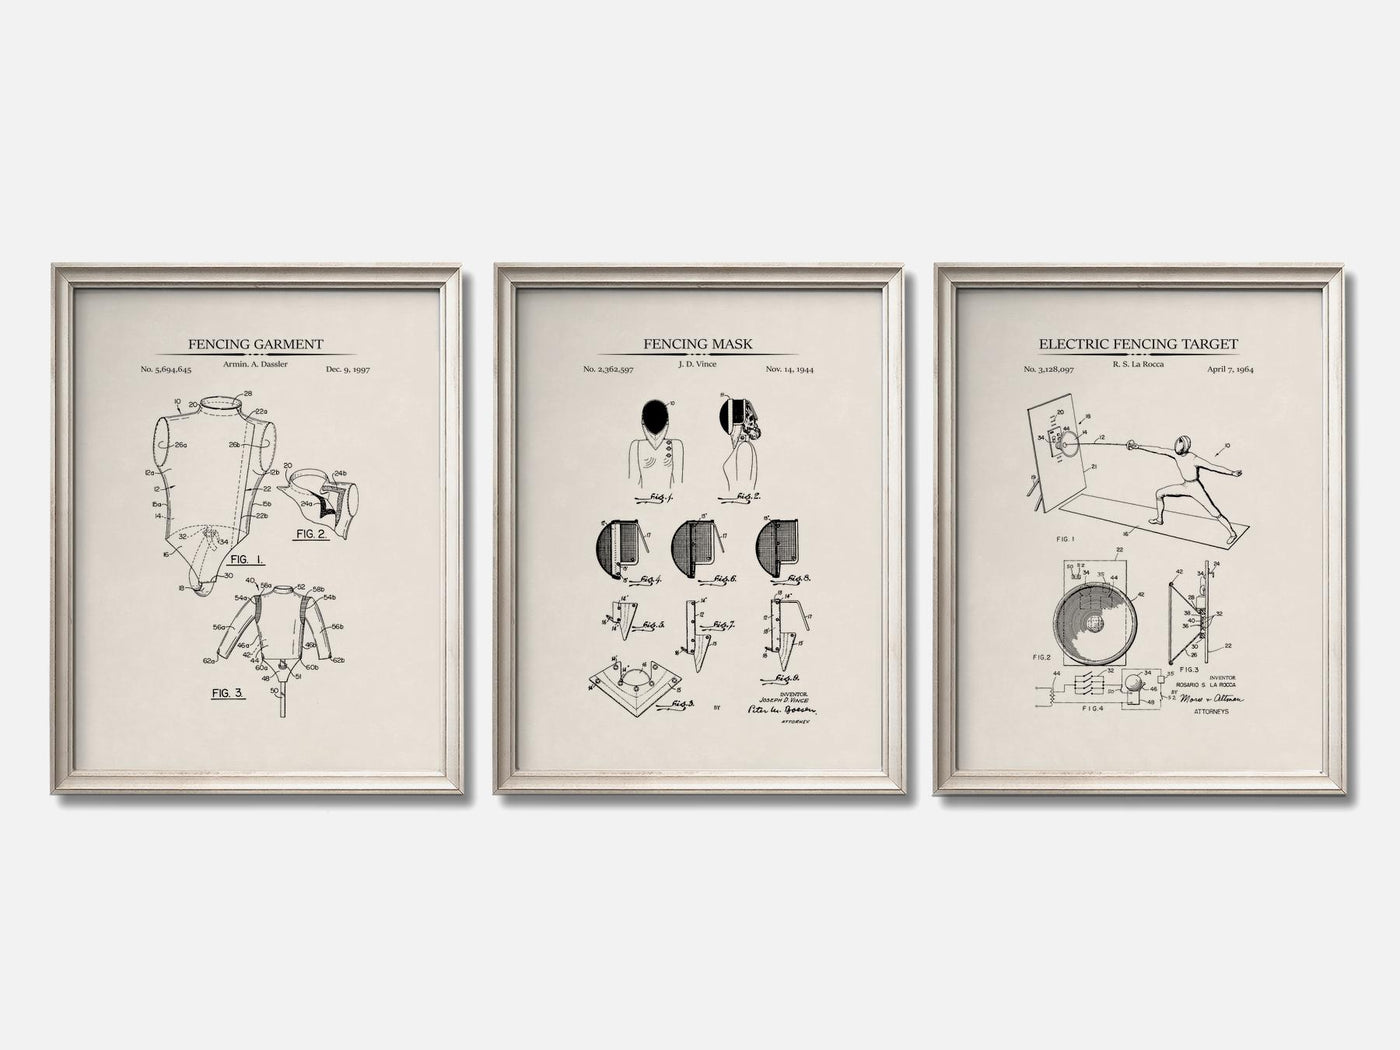 Fencing Patent Print Set of 3 mockup - A_t10080-V1-PC_F+O-SS_3-PS_11x14-C_ivo variant